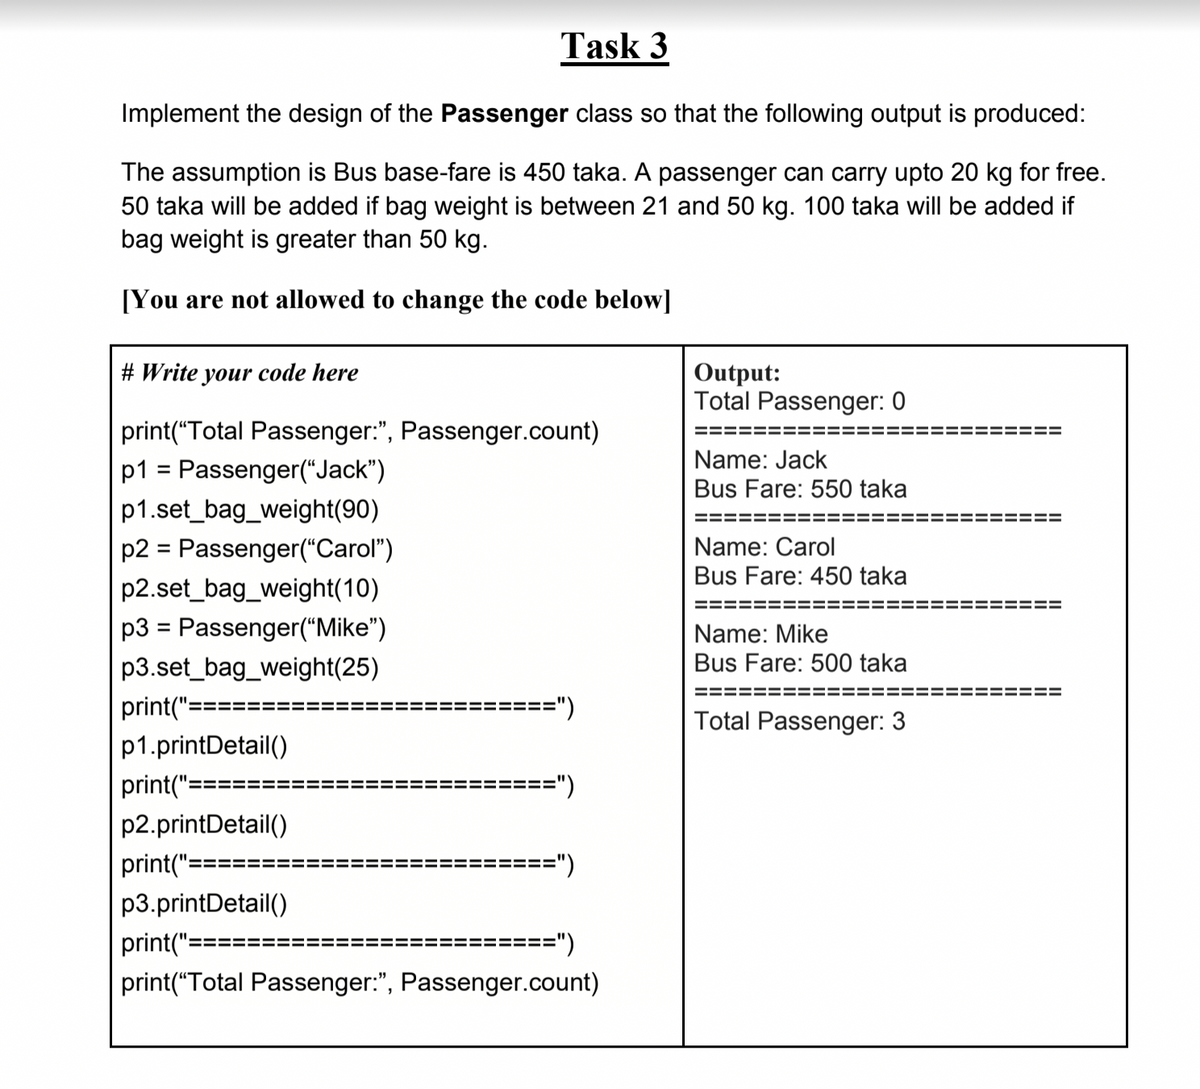 Task 3
Implement the design of the Passenger class so that the following output is produced:
The assumption is Bus base-fare is 450 taka. A passenger can carry upto 20 kg for free.
50 taka will be added if bag weight is between 21 and 50 kg. 100 taka will be added if
bag weight is greater than 50 kg.
[You are not allowed to change the code below]
Output:
Total Passenger: 0
# Write your code here
print(“Total Passenger:", Passenger.count)
==
Name: Jack
p1 = Passenger(“Jack")
Bus Fare: 550 taka
p1.set_bag_weight(90)
=====
!==
p2 = Passenger("Carol")
Name: Carol
Bus Fare: 450 taka
p2.set_bag_weight(10)
==
p3 = Passenger("Mike")
Name: Mike
p3.set_bag_weight(25)
Bus Fare: 500 taka
====
print("==
=")
%3D
Total Passenger: 3
p1.printDetail()
print("==
==")
p2.printDetail()
print("=
=")
p3.printDetail()
print("==
==")
print("Total Passenger:", Passenger.count)
